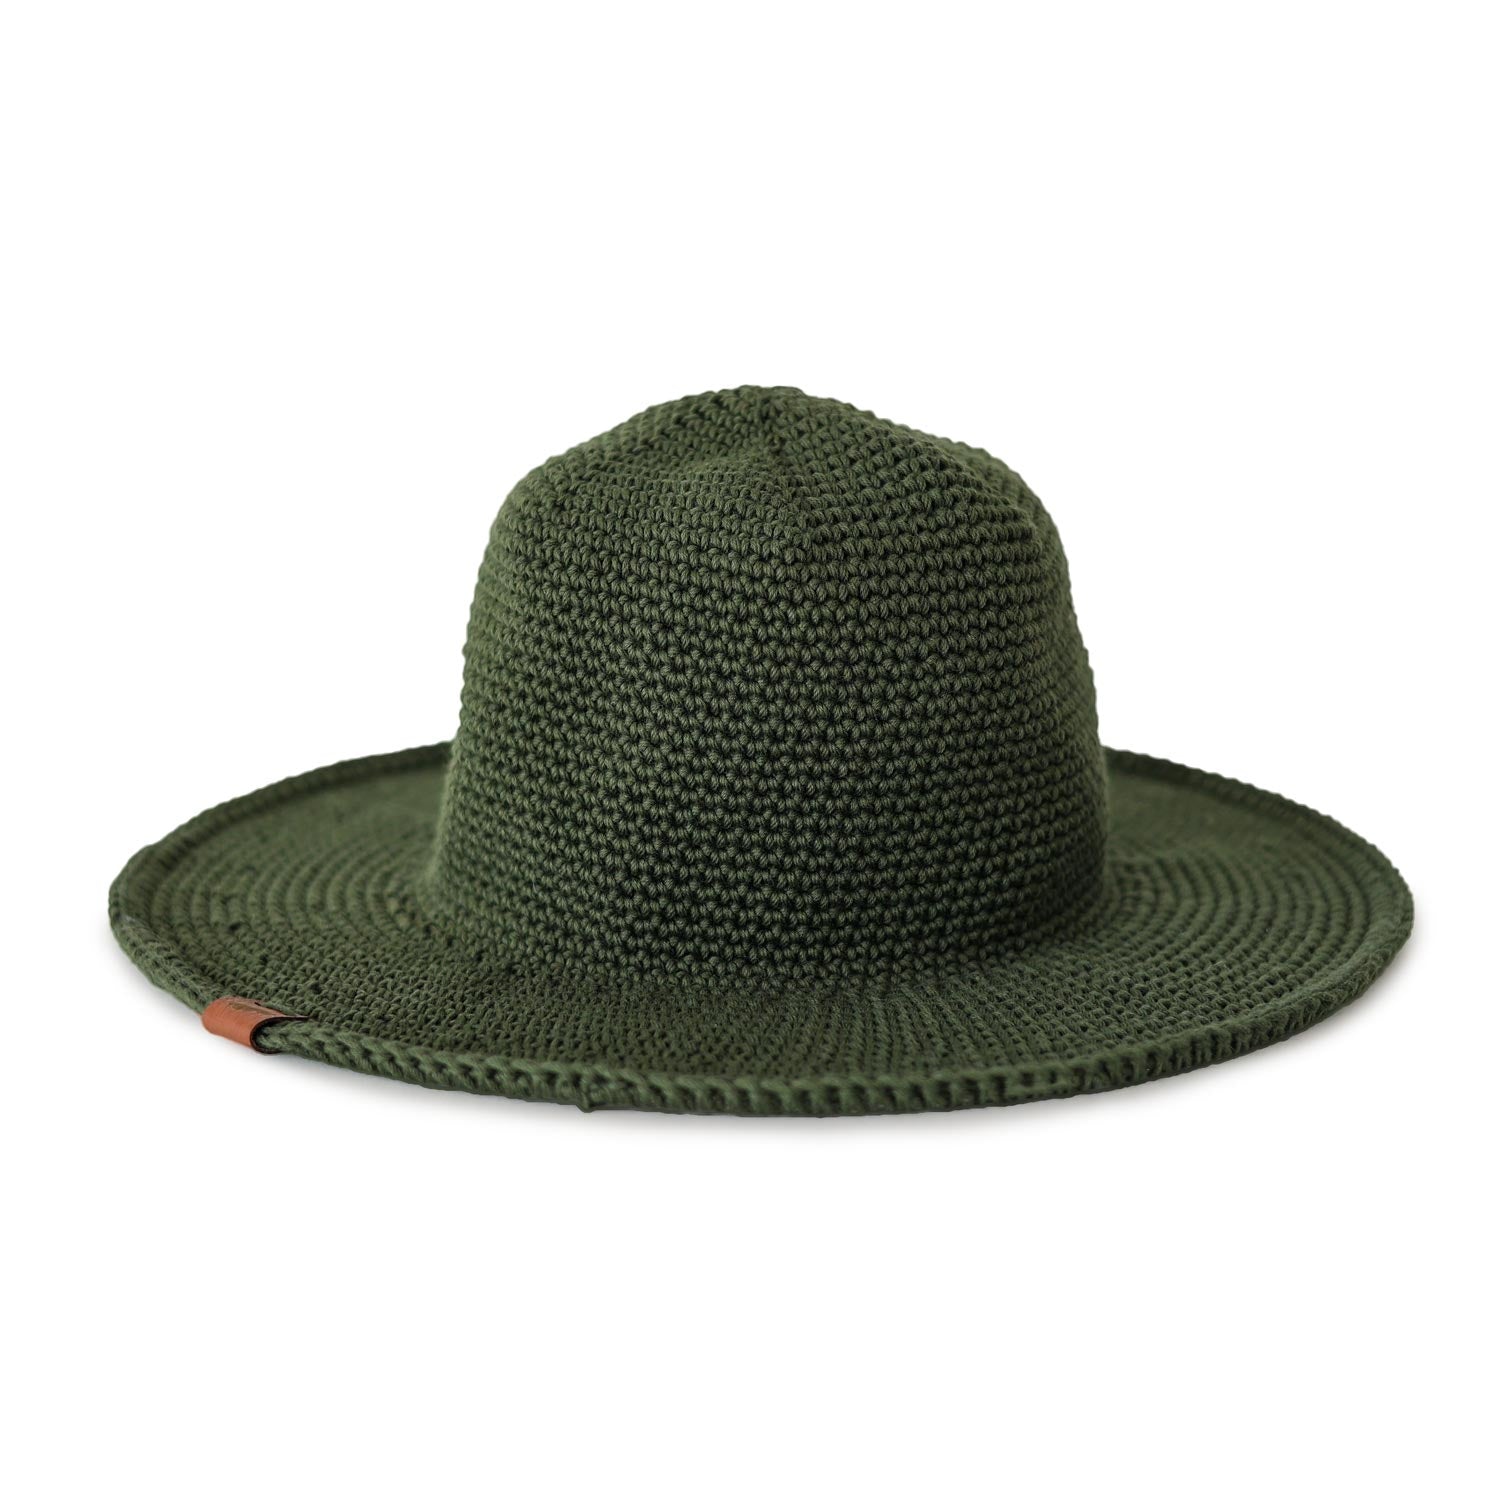 Packable Cotton Sun Hat in color Leaf Green, flexible wire brim that is foldable and crushable. Stretchy crochet fiber makes one-size fits most. Organic Cotton Machine Washable and Fits Kids too